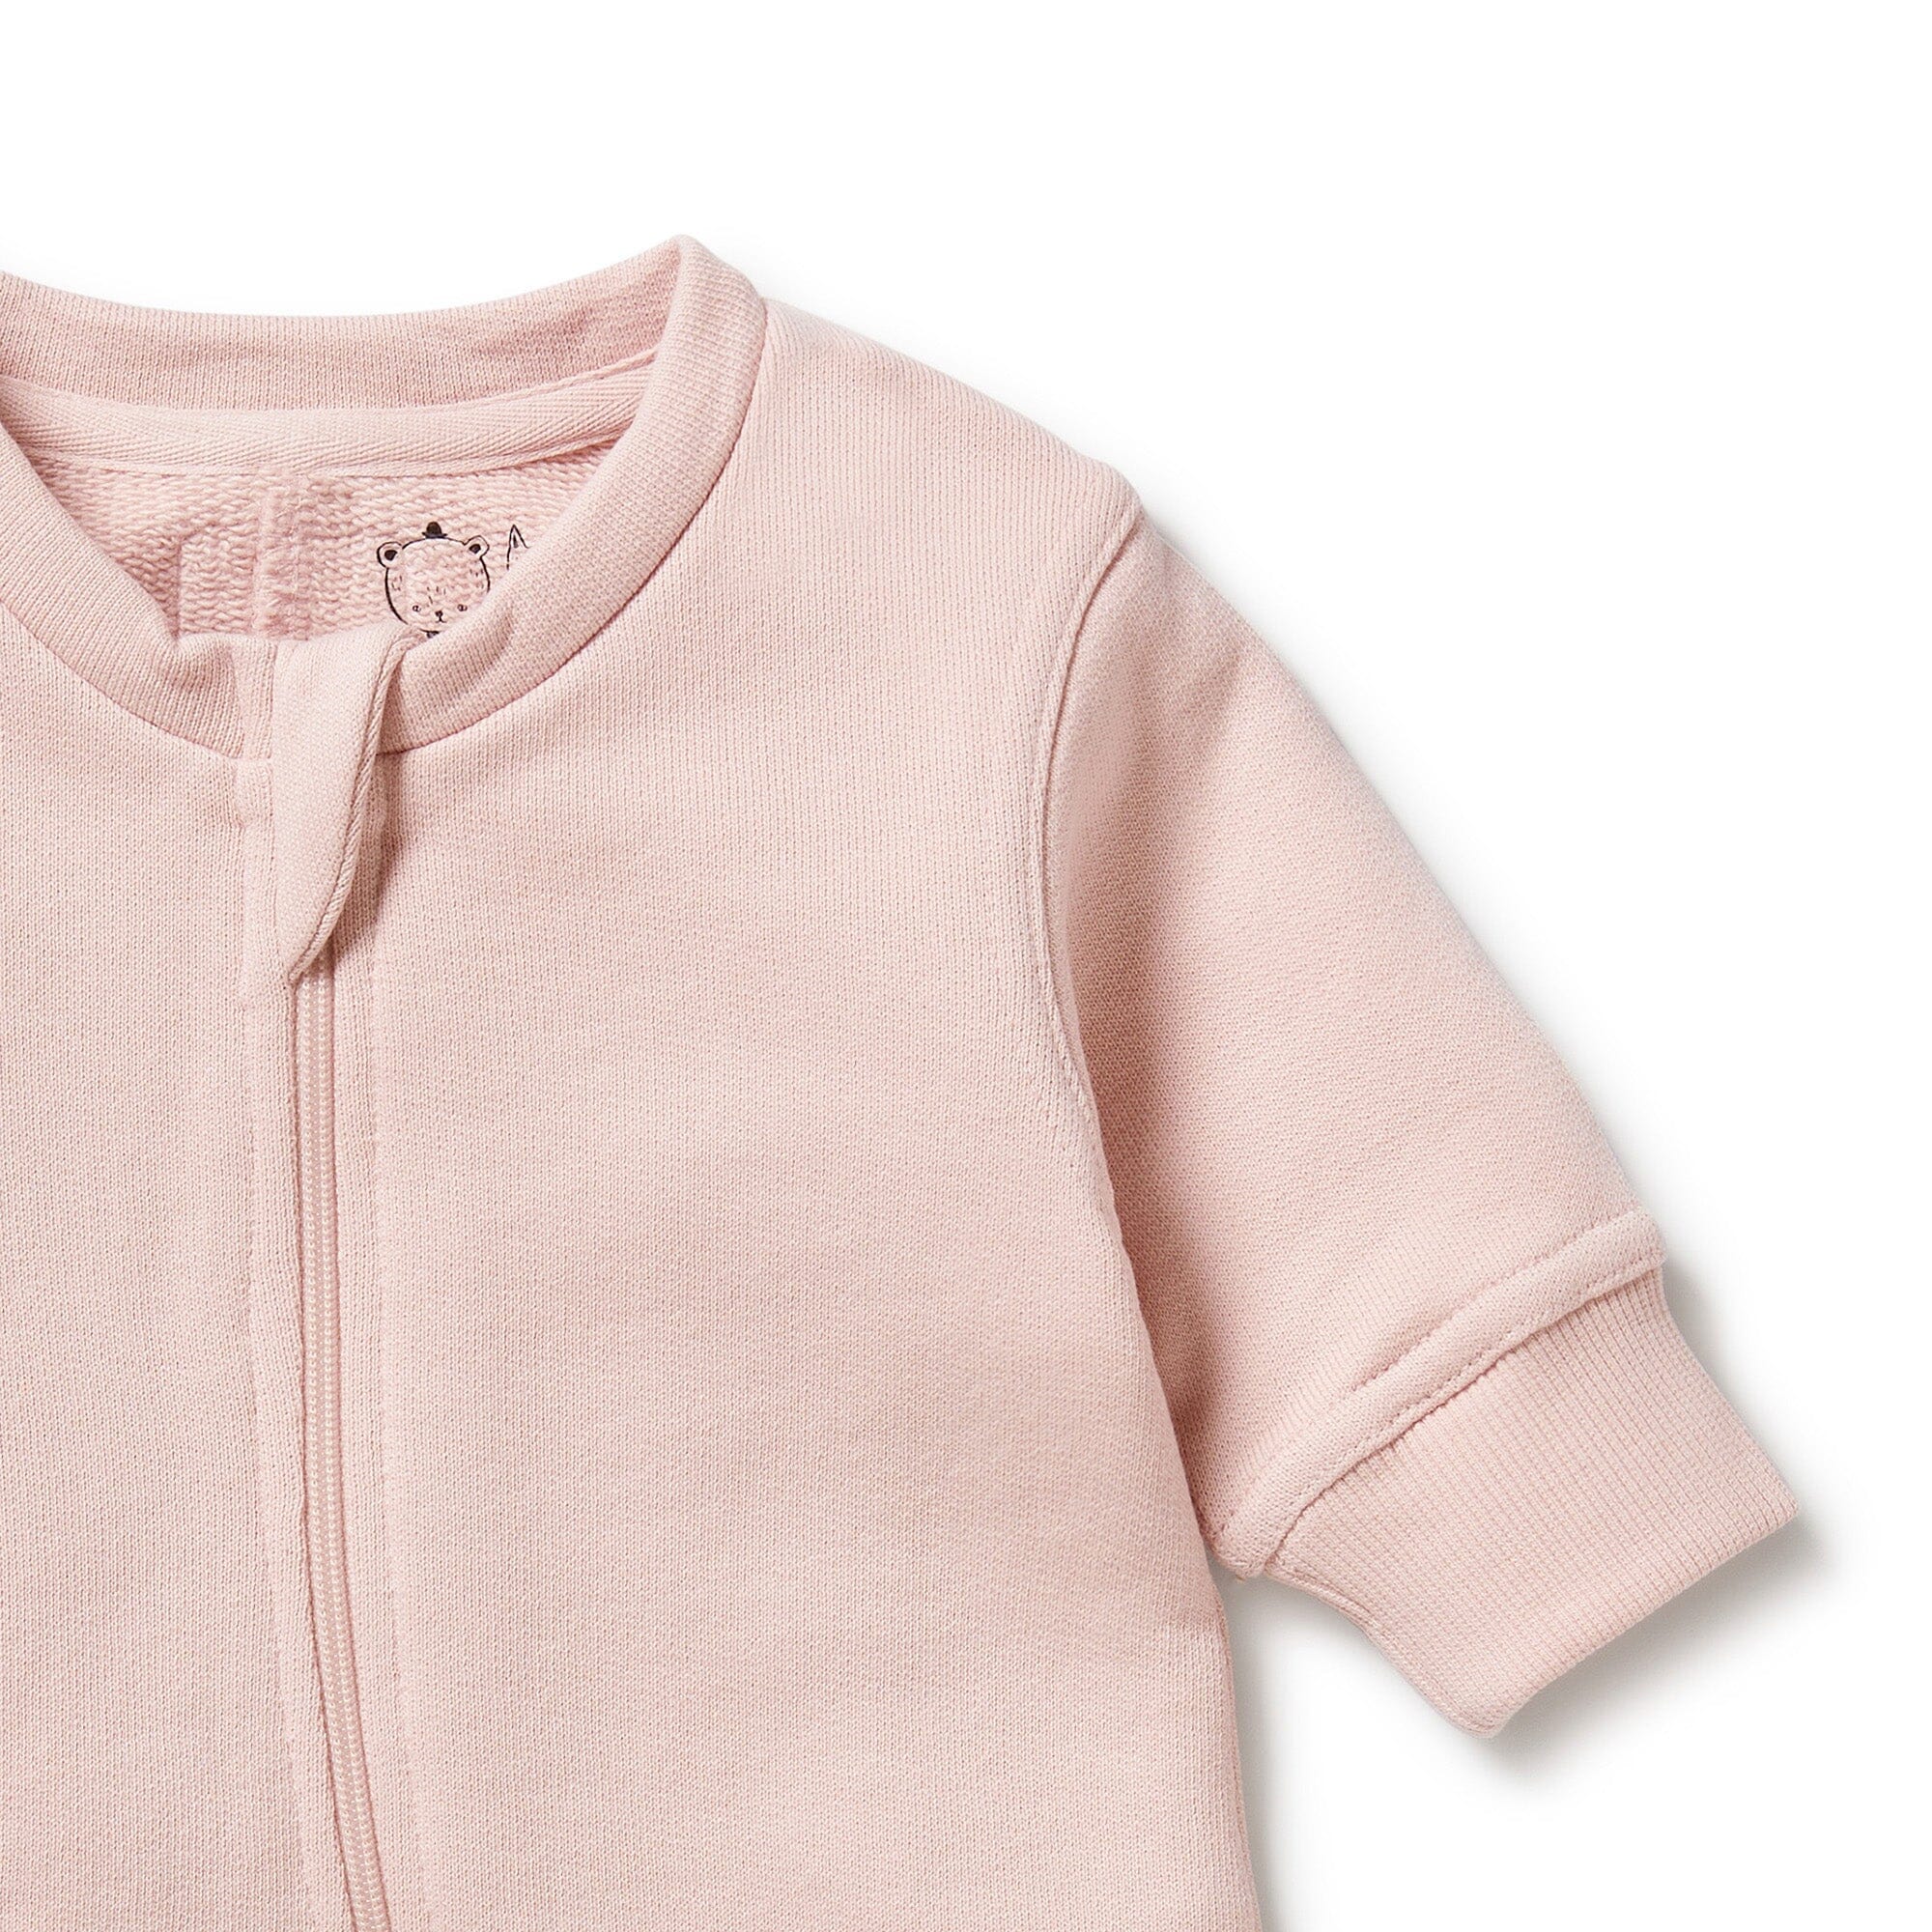 Wilson & Frenchy - Organic Terry Growsuit - Rose Baby Wilson & Frenchy